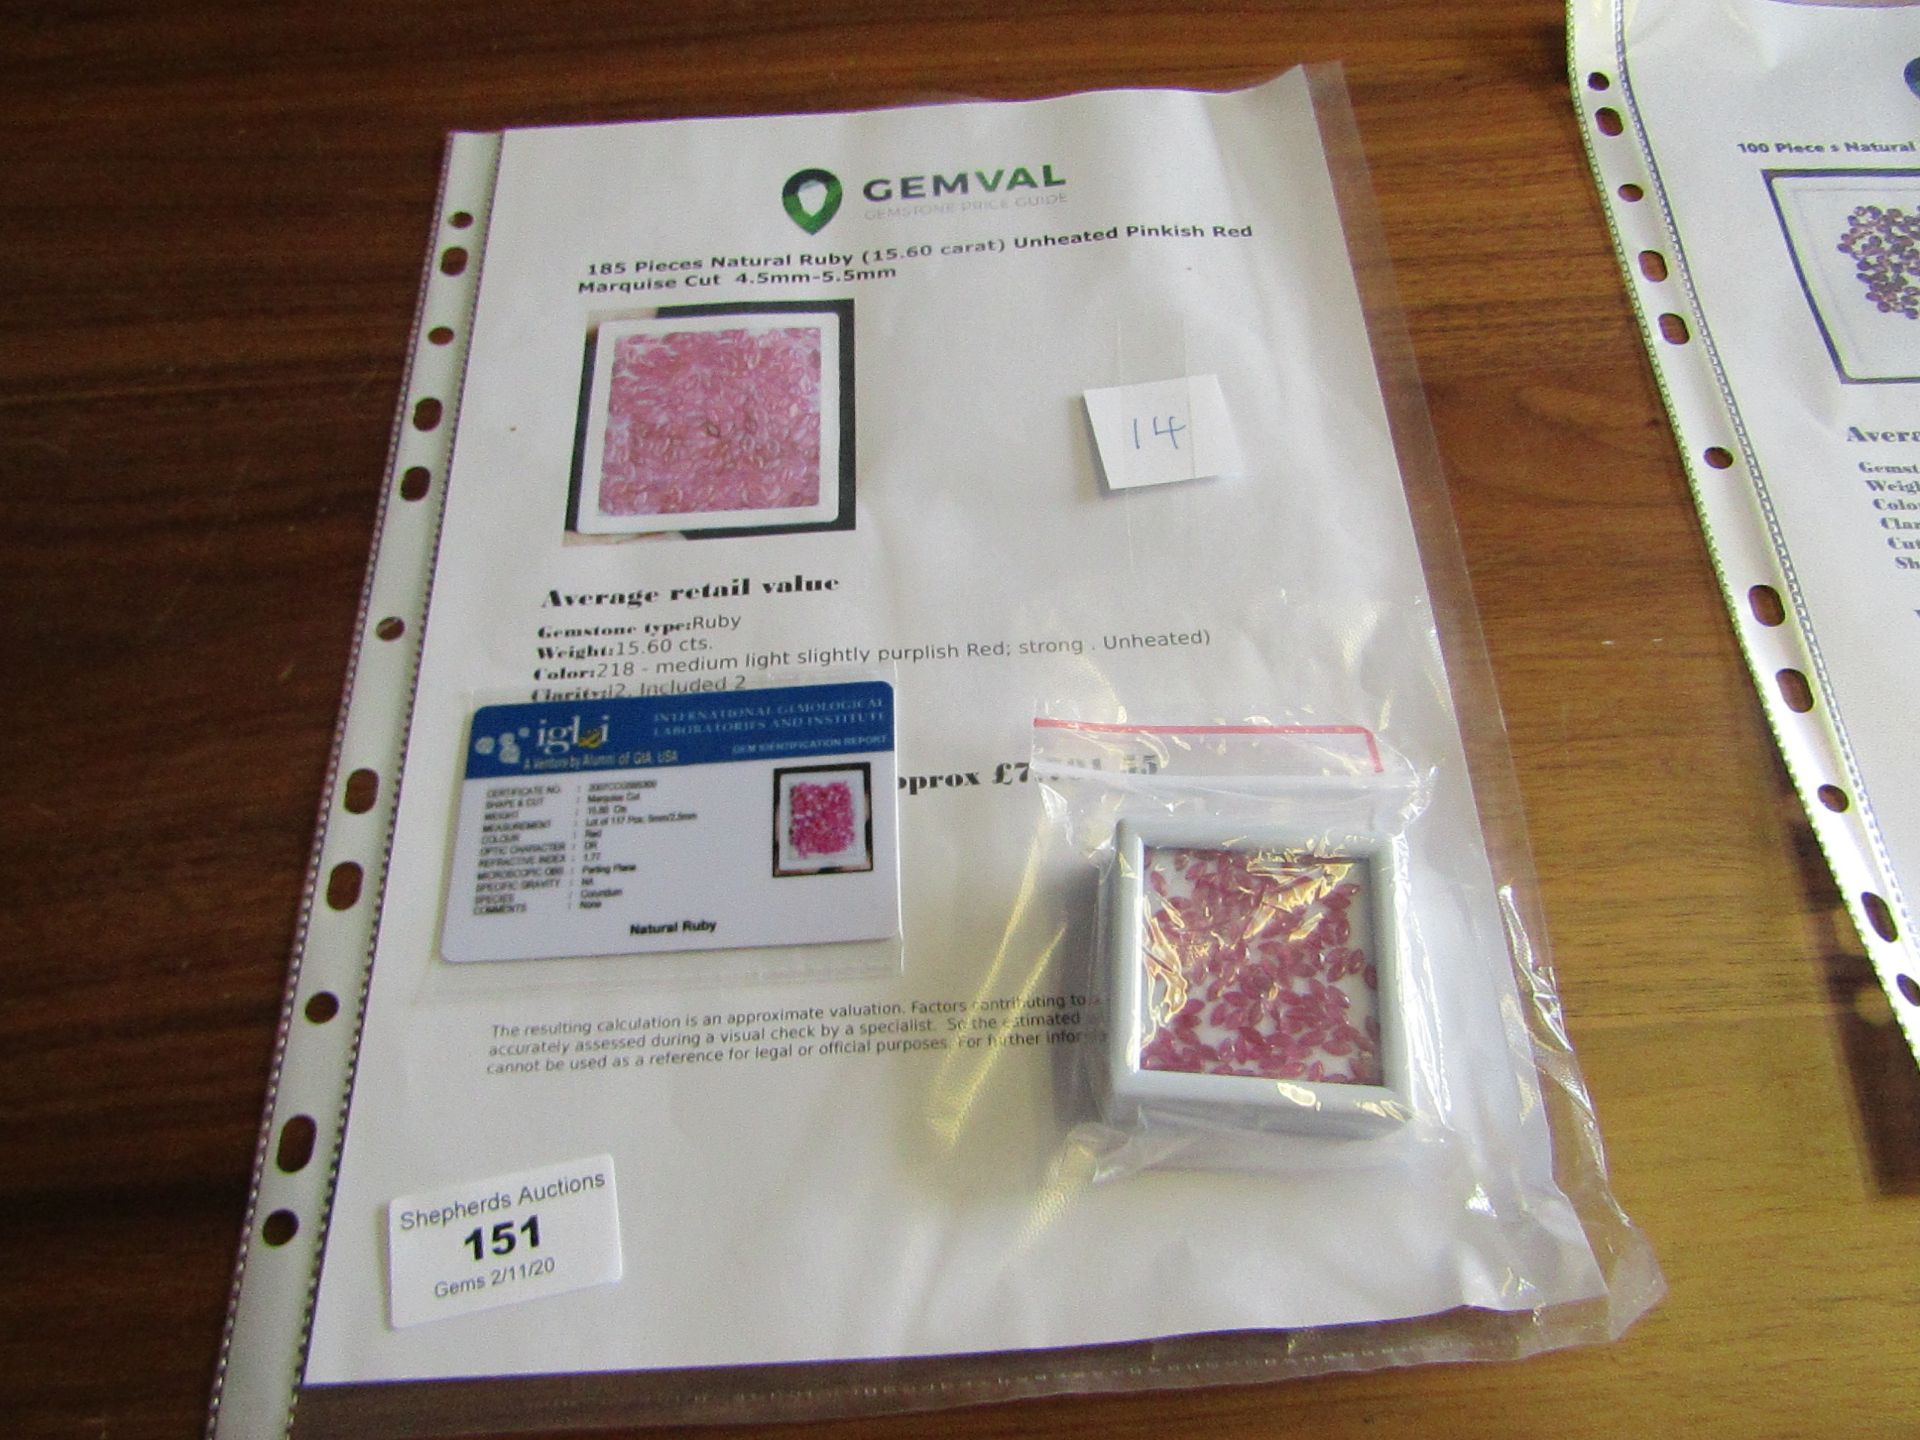 Natural Rubies - 15.60 carats - 185 pieces - average retail value £ 7,701.55 - Image 2 of 2